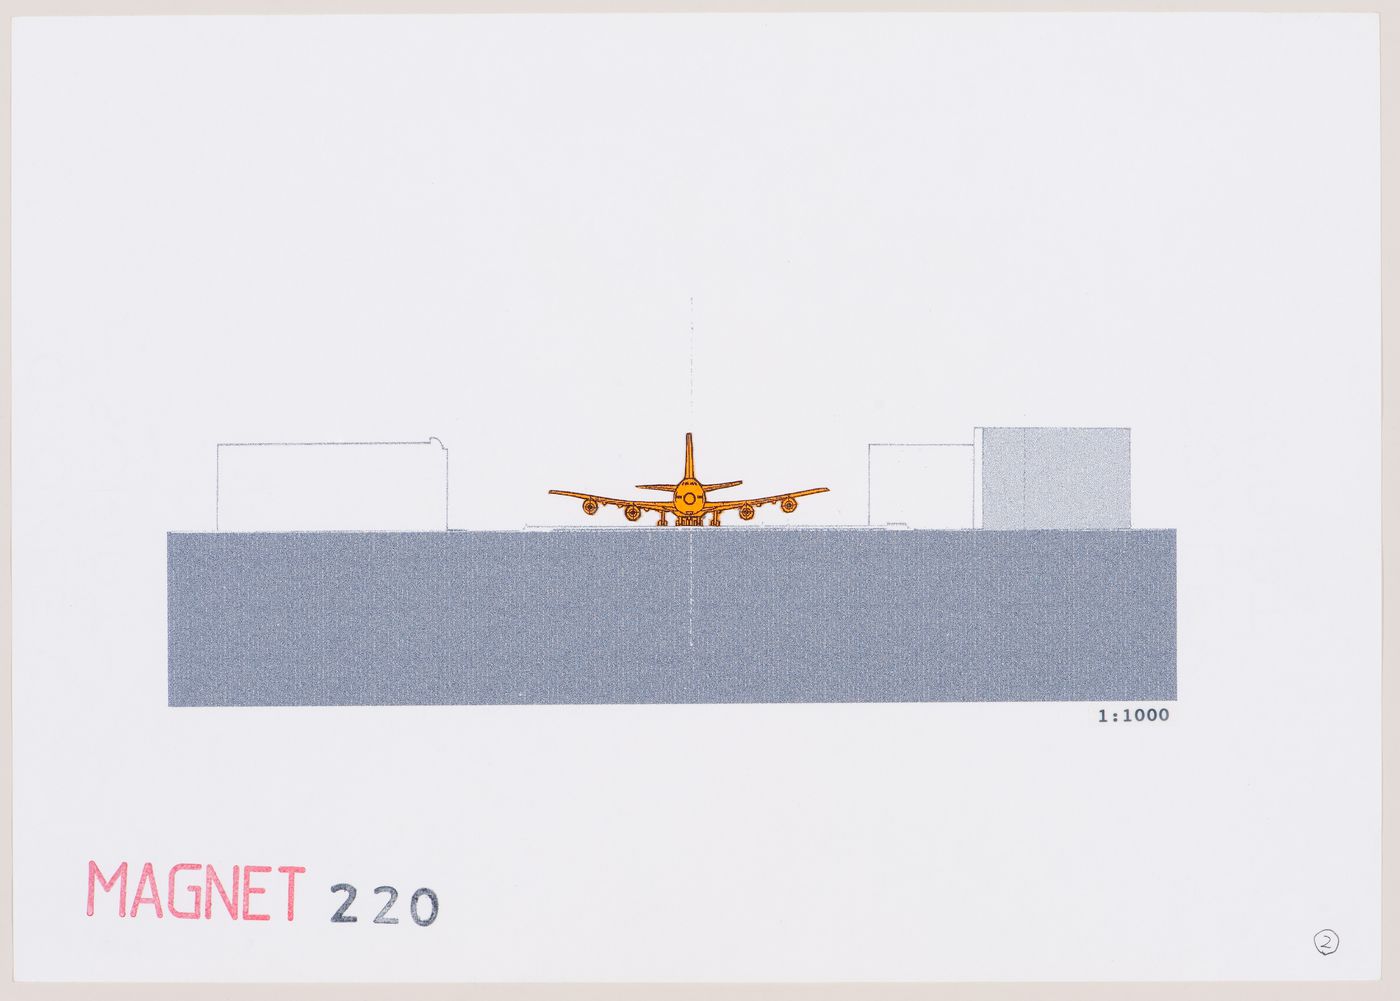 Magnet: Sectional elevation of Soho Square site with Boeing 747